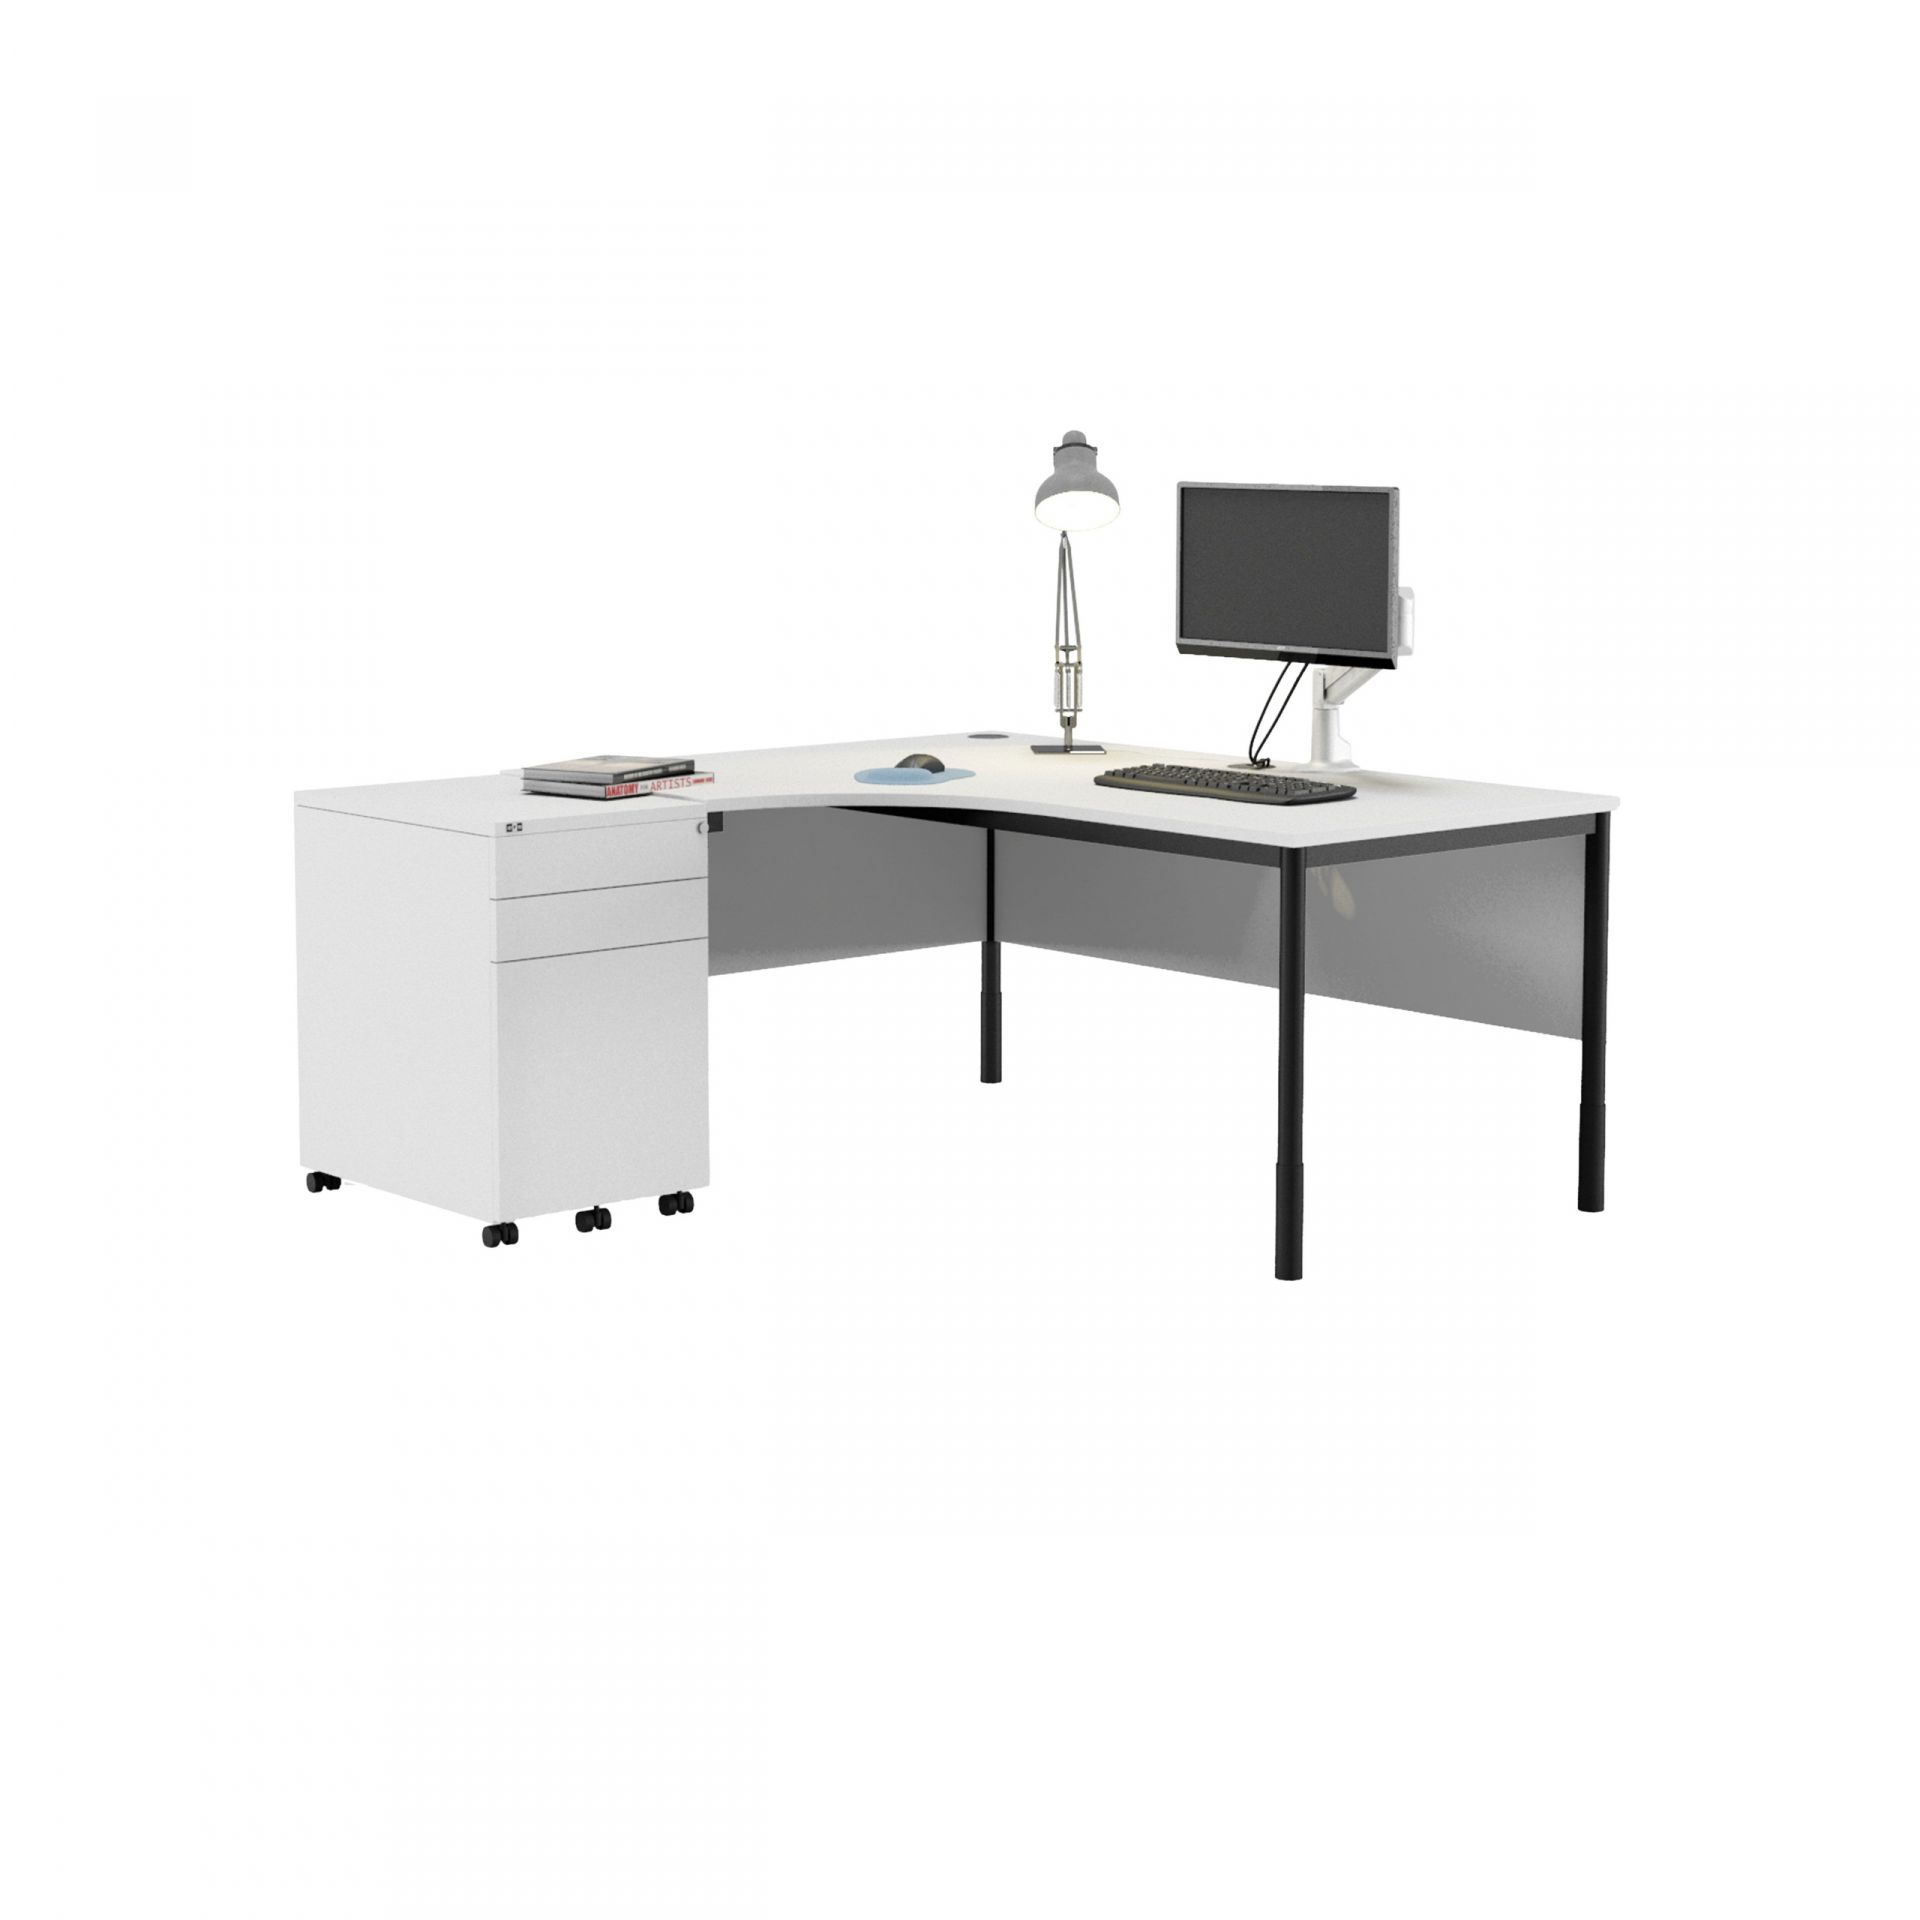 Team Pro Desk/meeting table product image 2